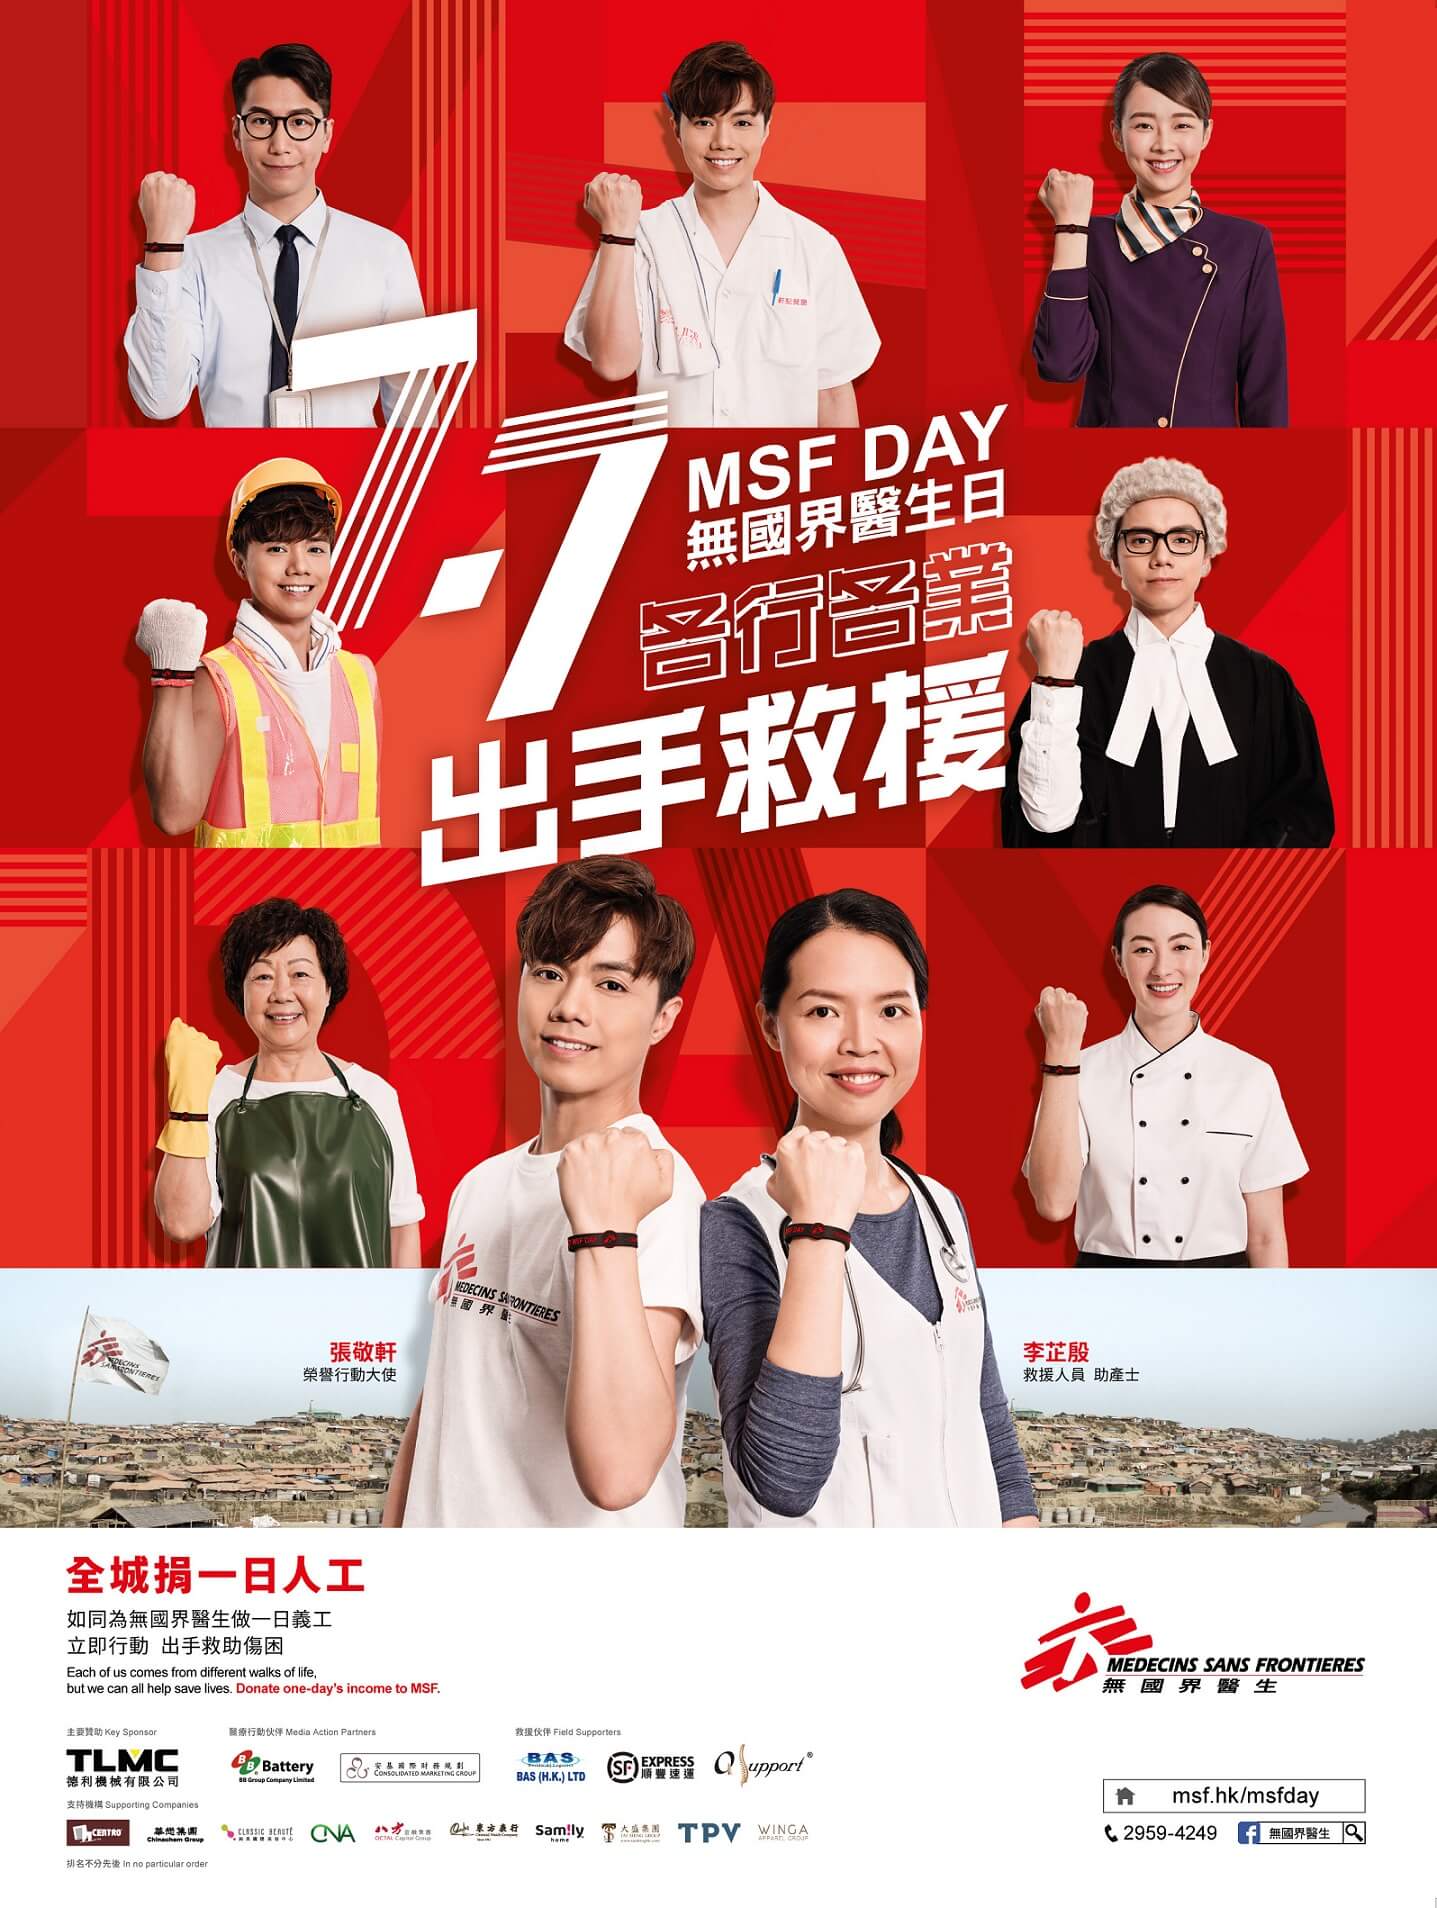 By participating in the “MSF Day 2019”, consultants and staff of YF Life supported MSF field workers who work at adverse circumstances.